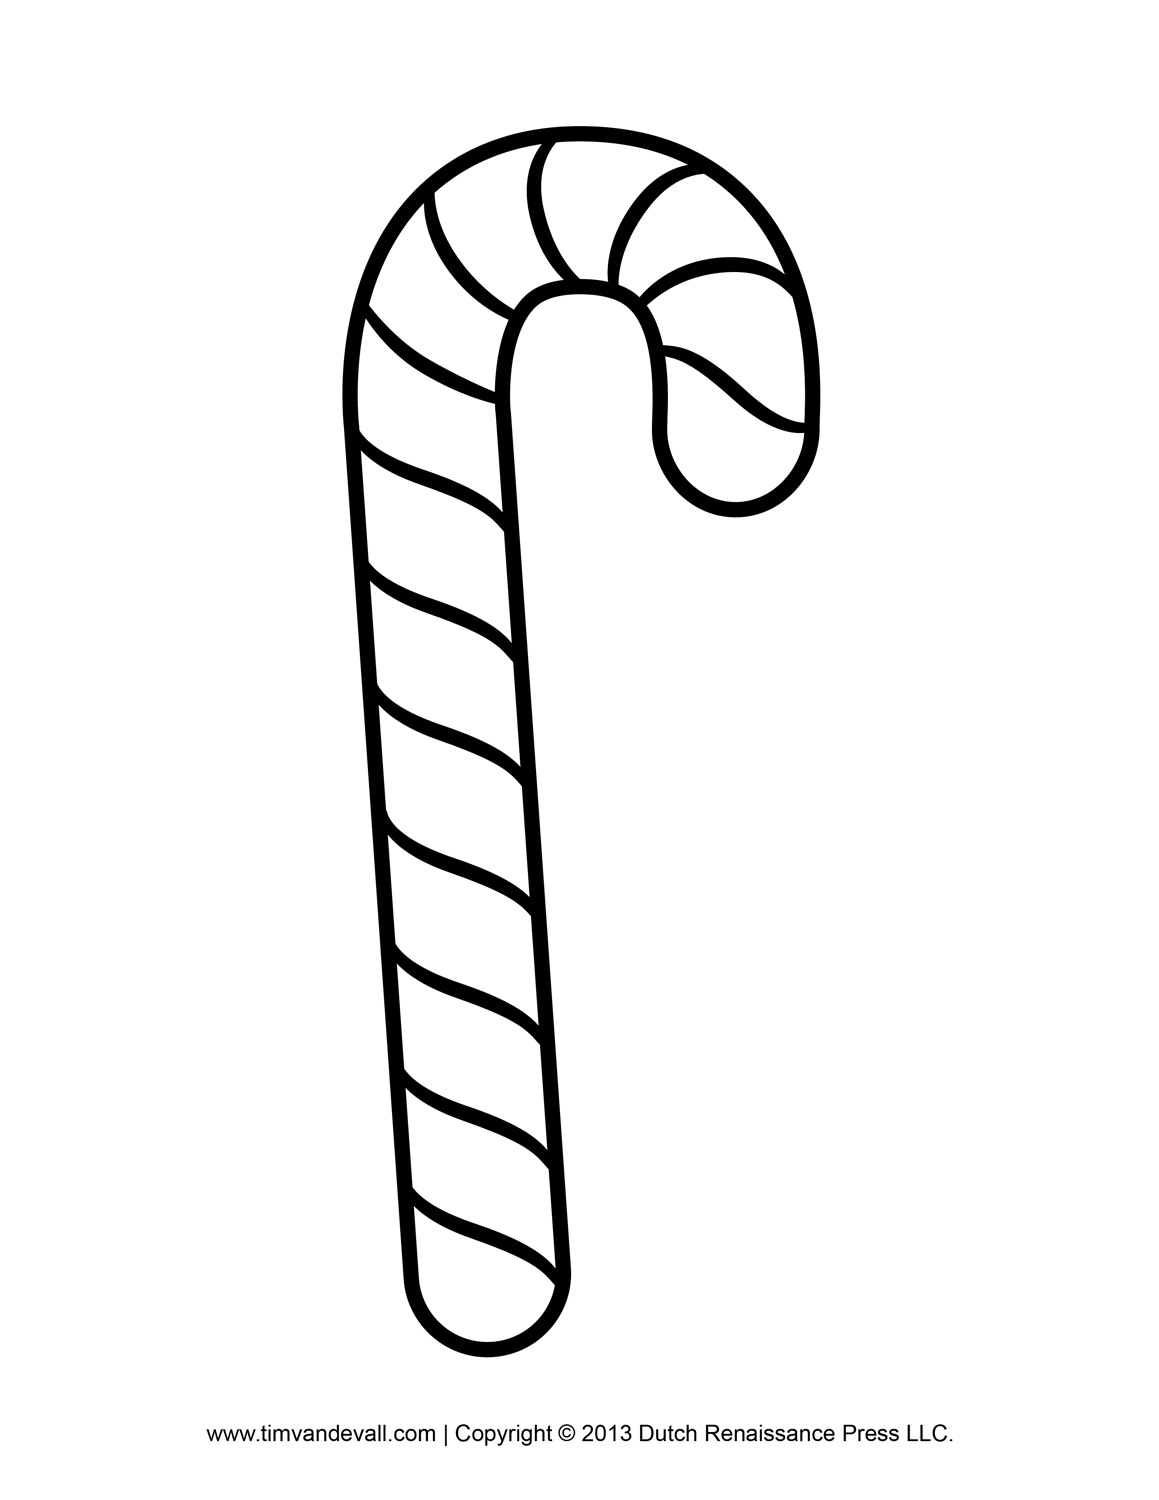 Free Candy Cane Template Printables, Clip Art & Decorations